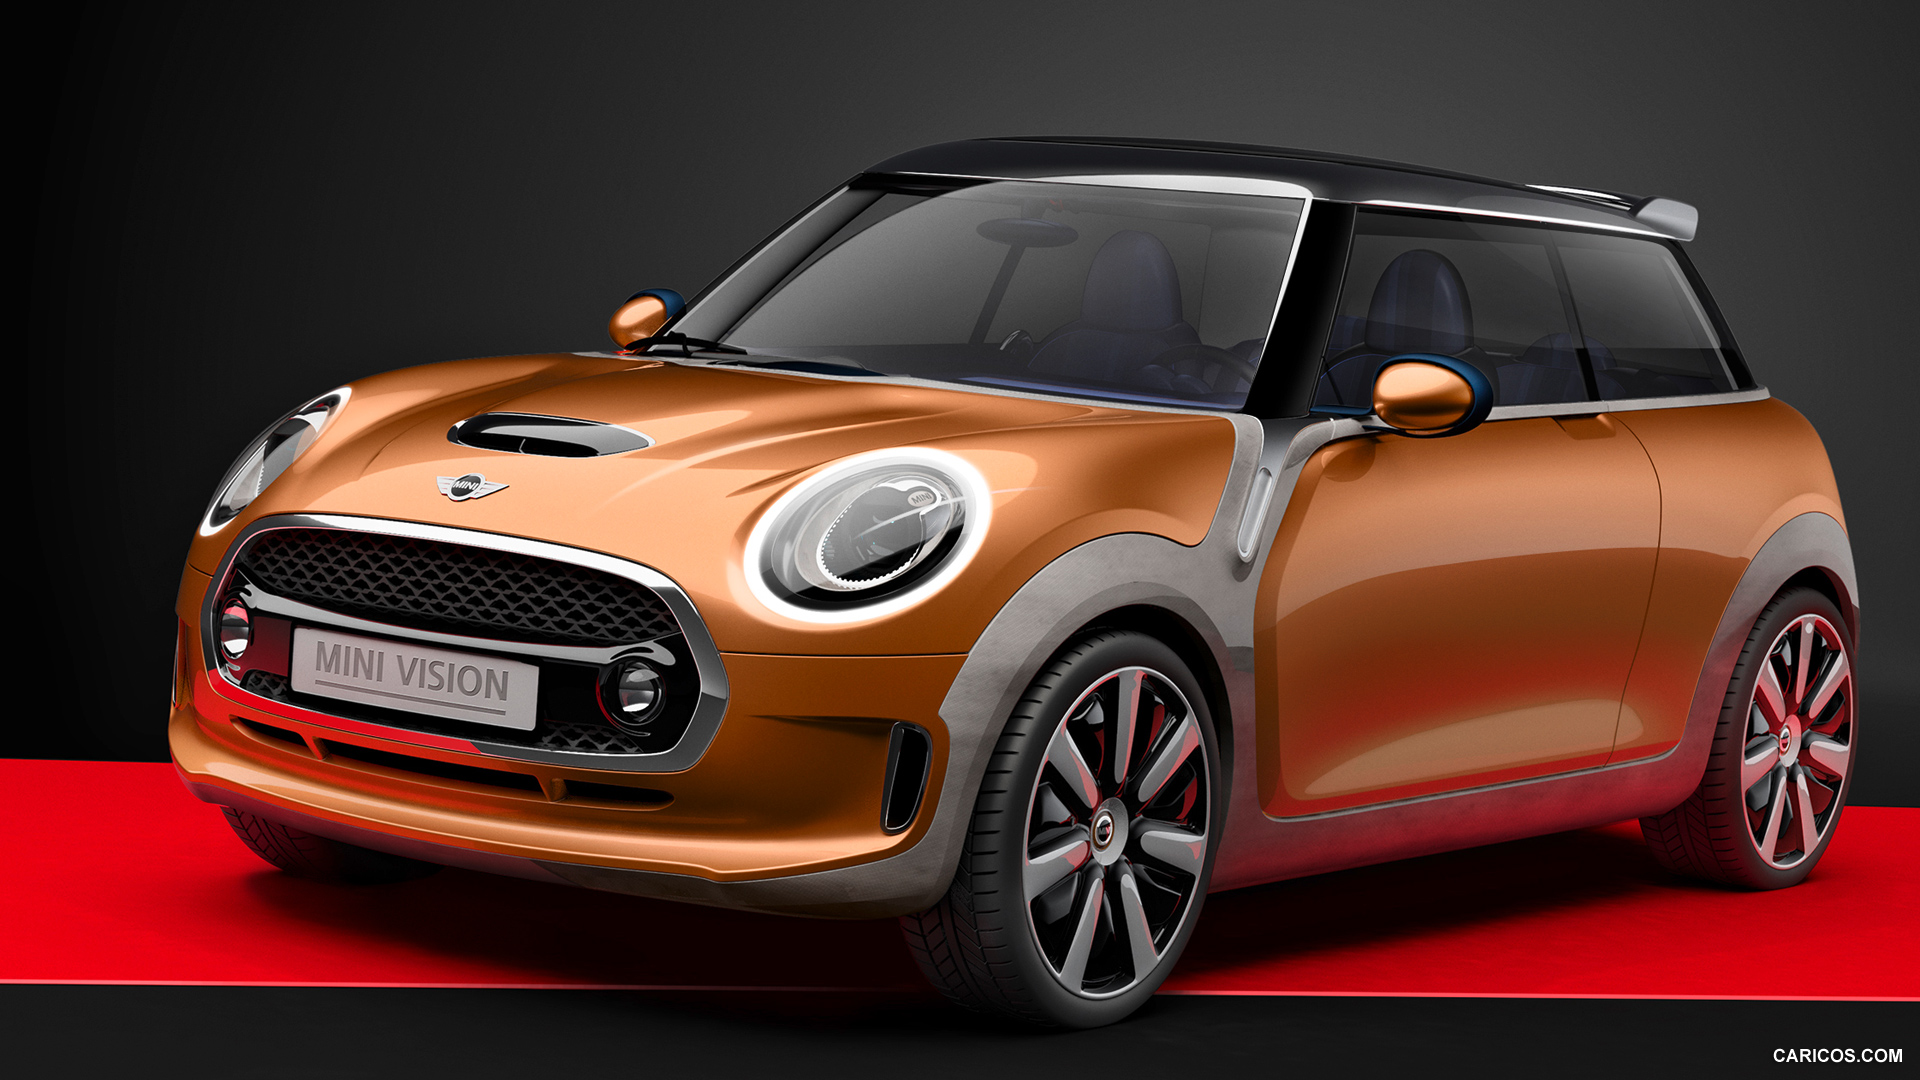 2013 MINI Vision Concept  - Front, #1 of 8